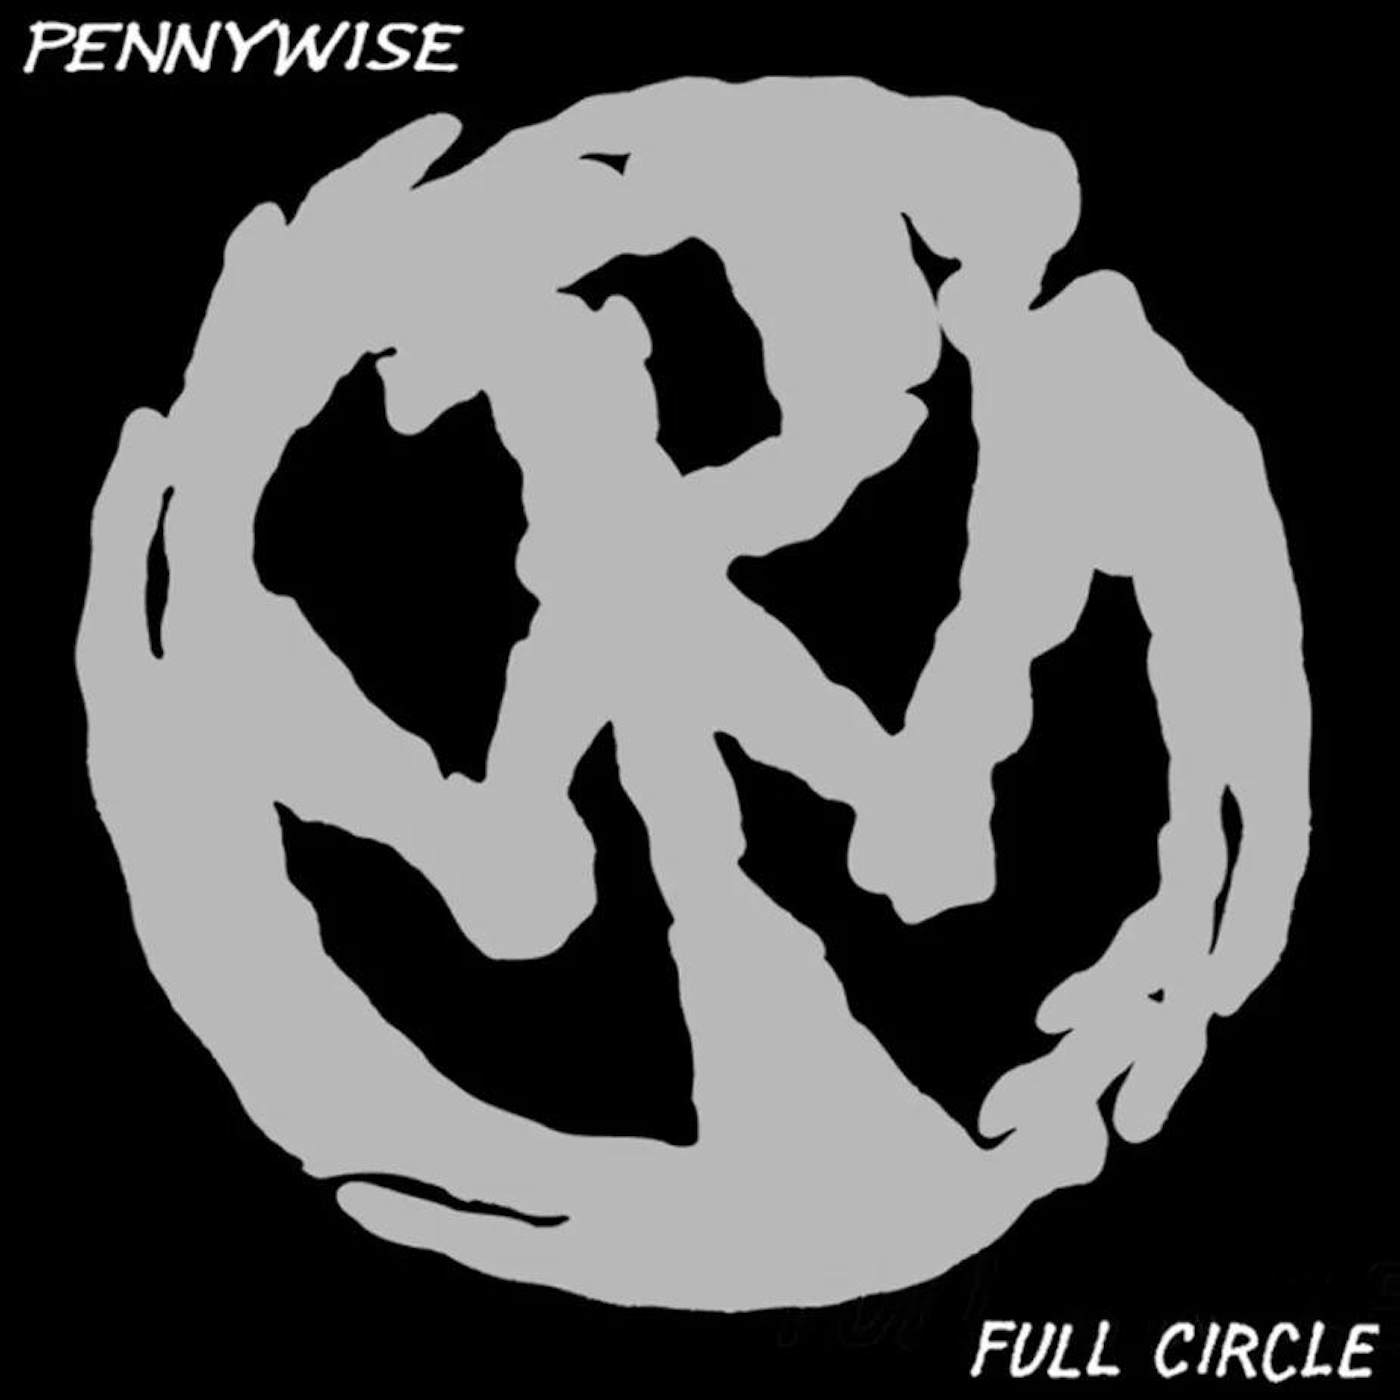 Pennywise Full Circle Vinyl Record